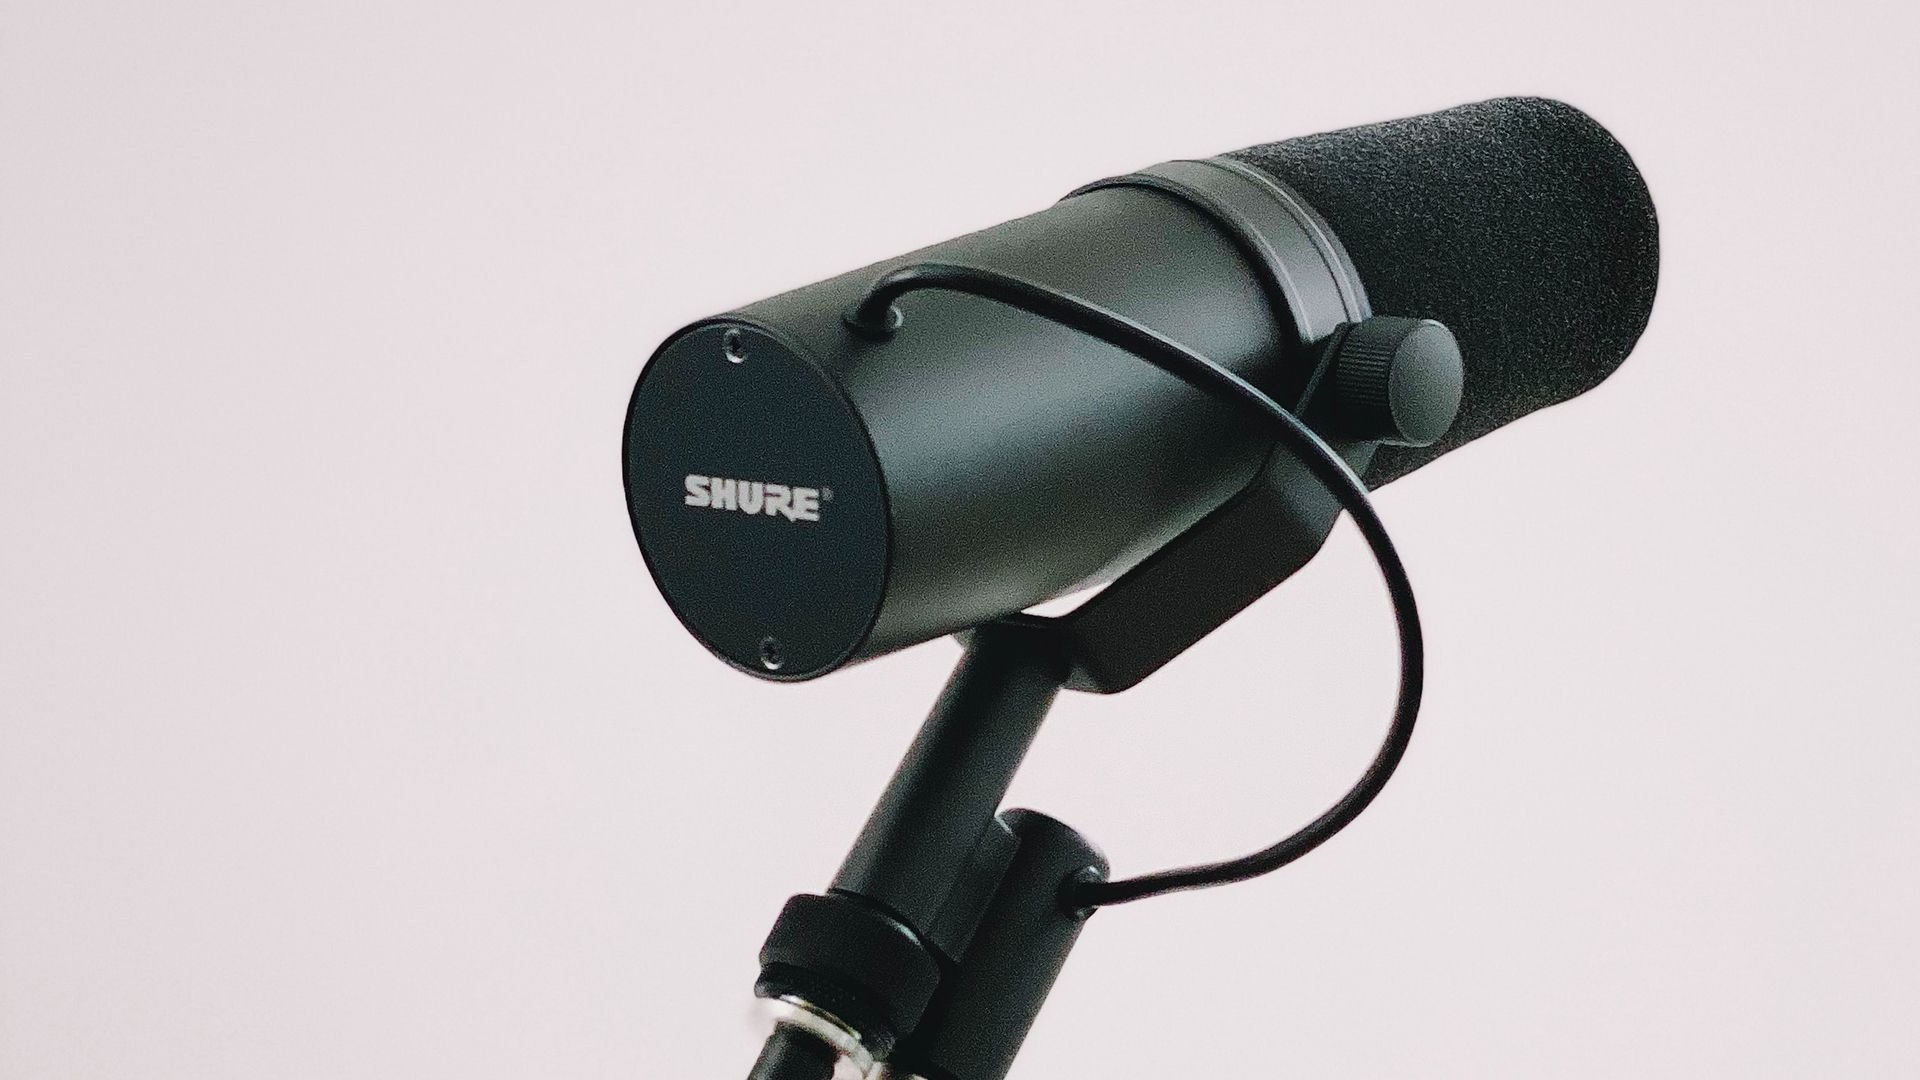 How to Choose the Best Microphone for